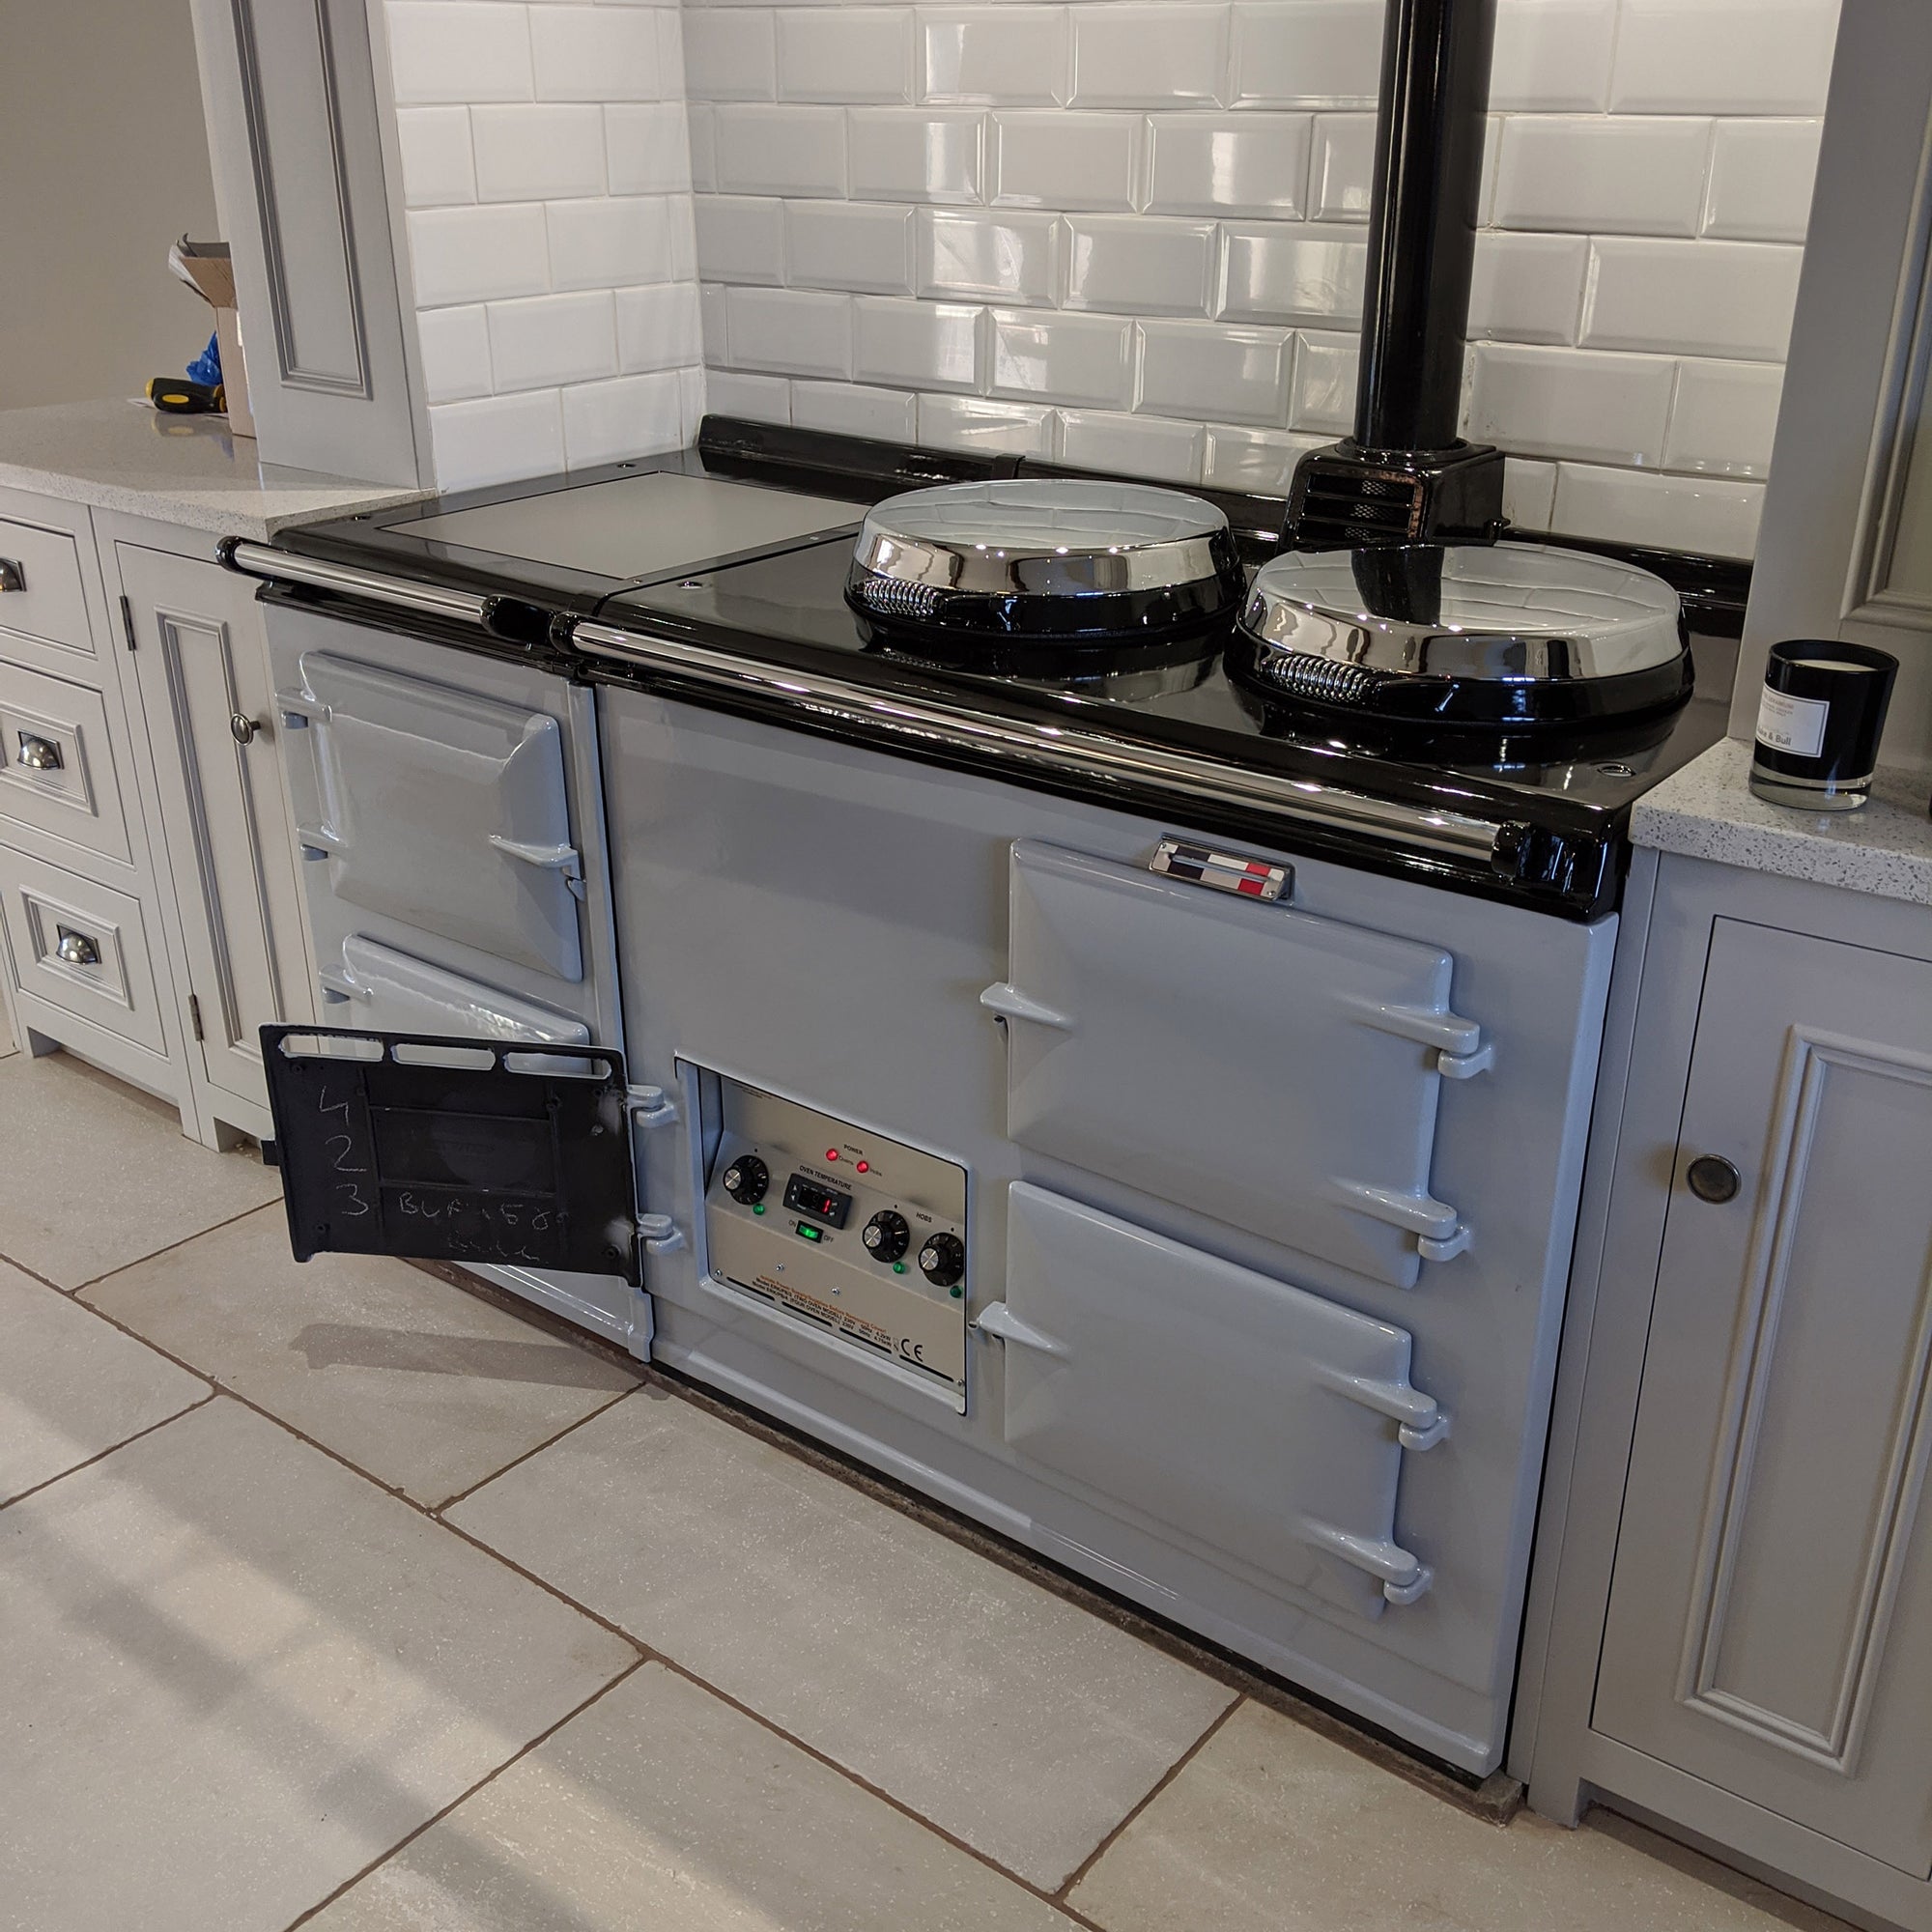 A light grey 'eCook' reconditioned Aga range cooker installation